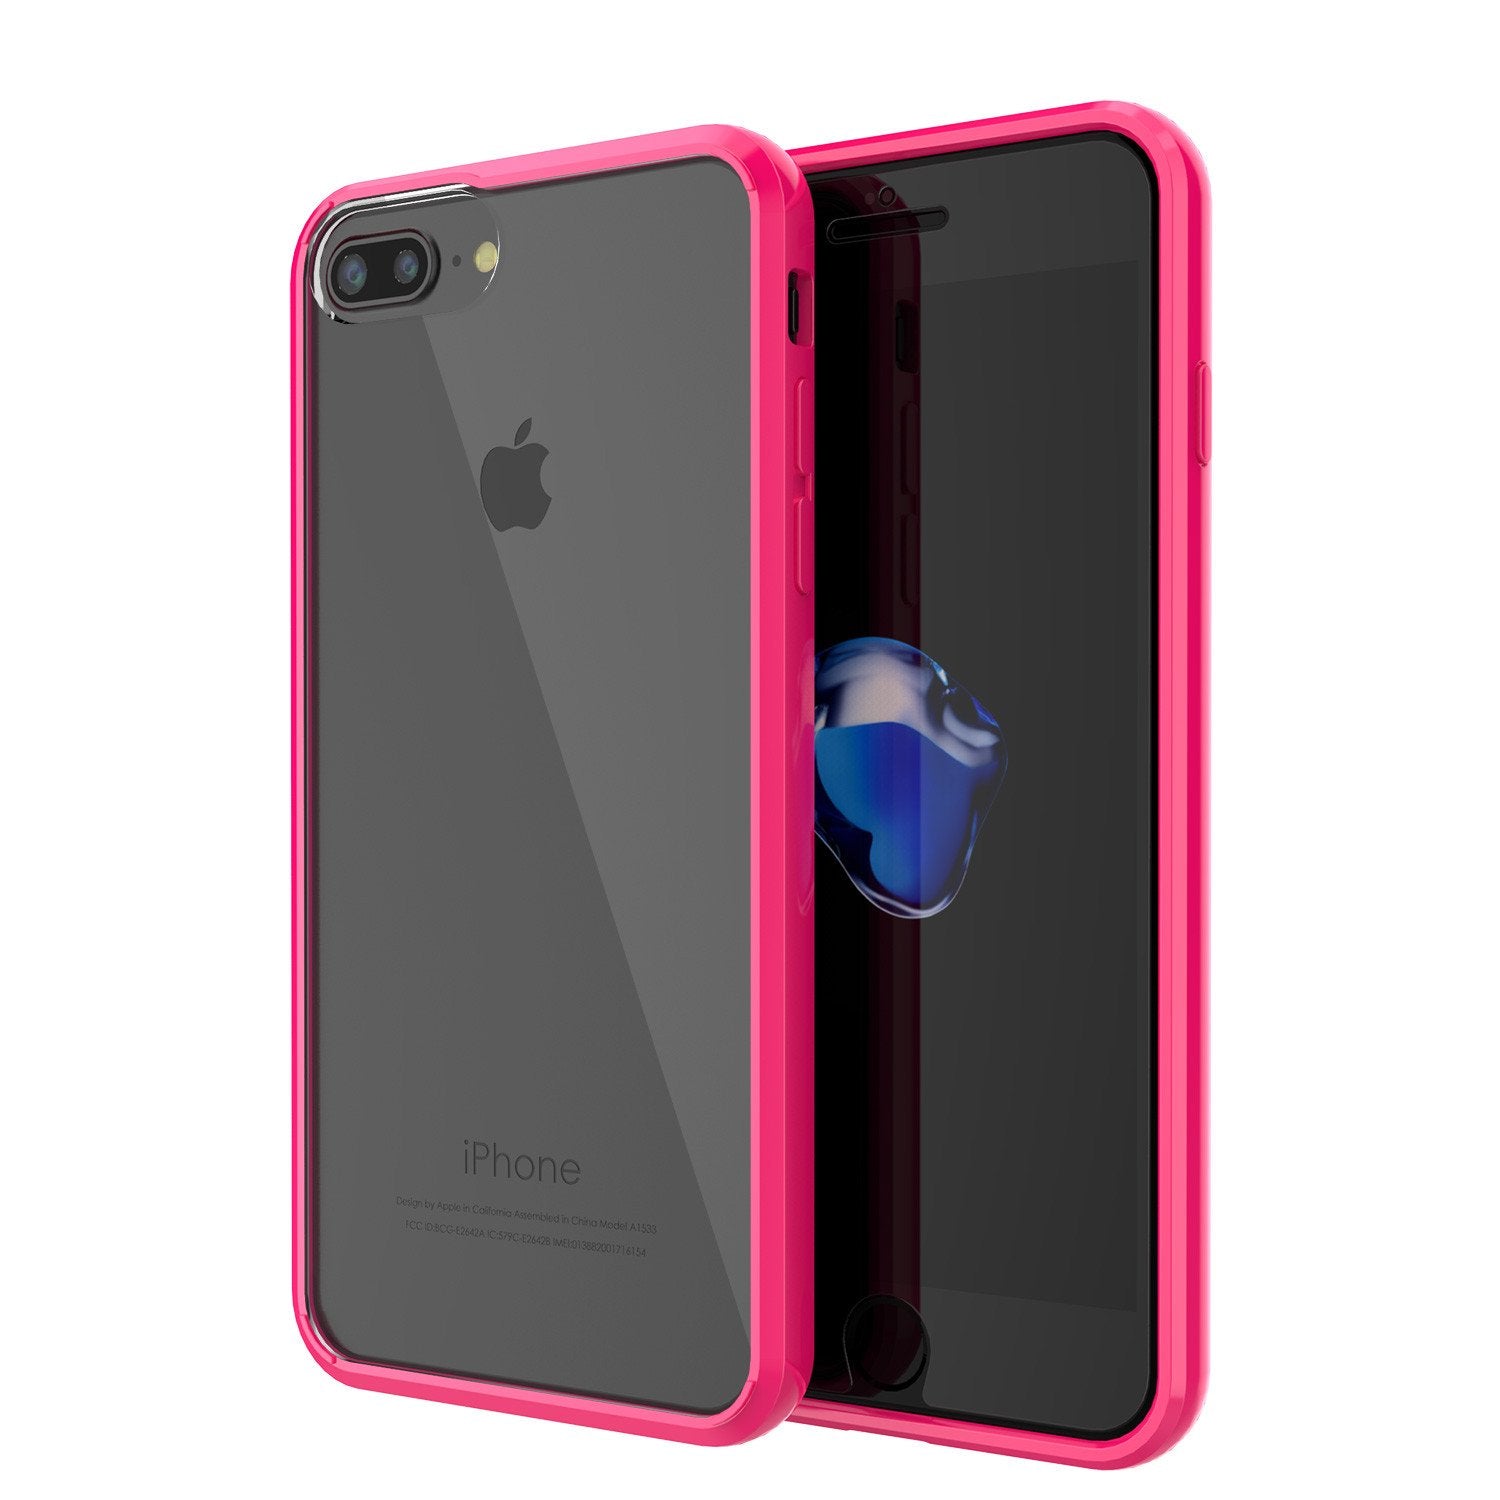 iPhone 7 Case Punkcase® LUCID 2.0 Pink Series w/ PUNK SHIELD Screen Protector | Ultra Fit